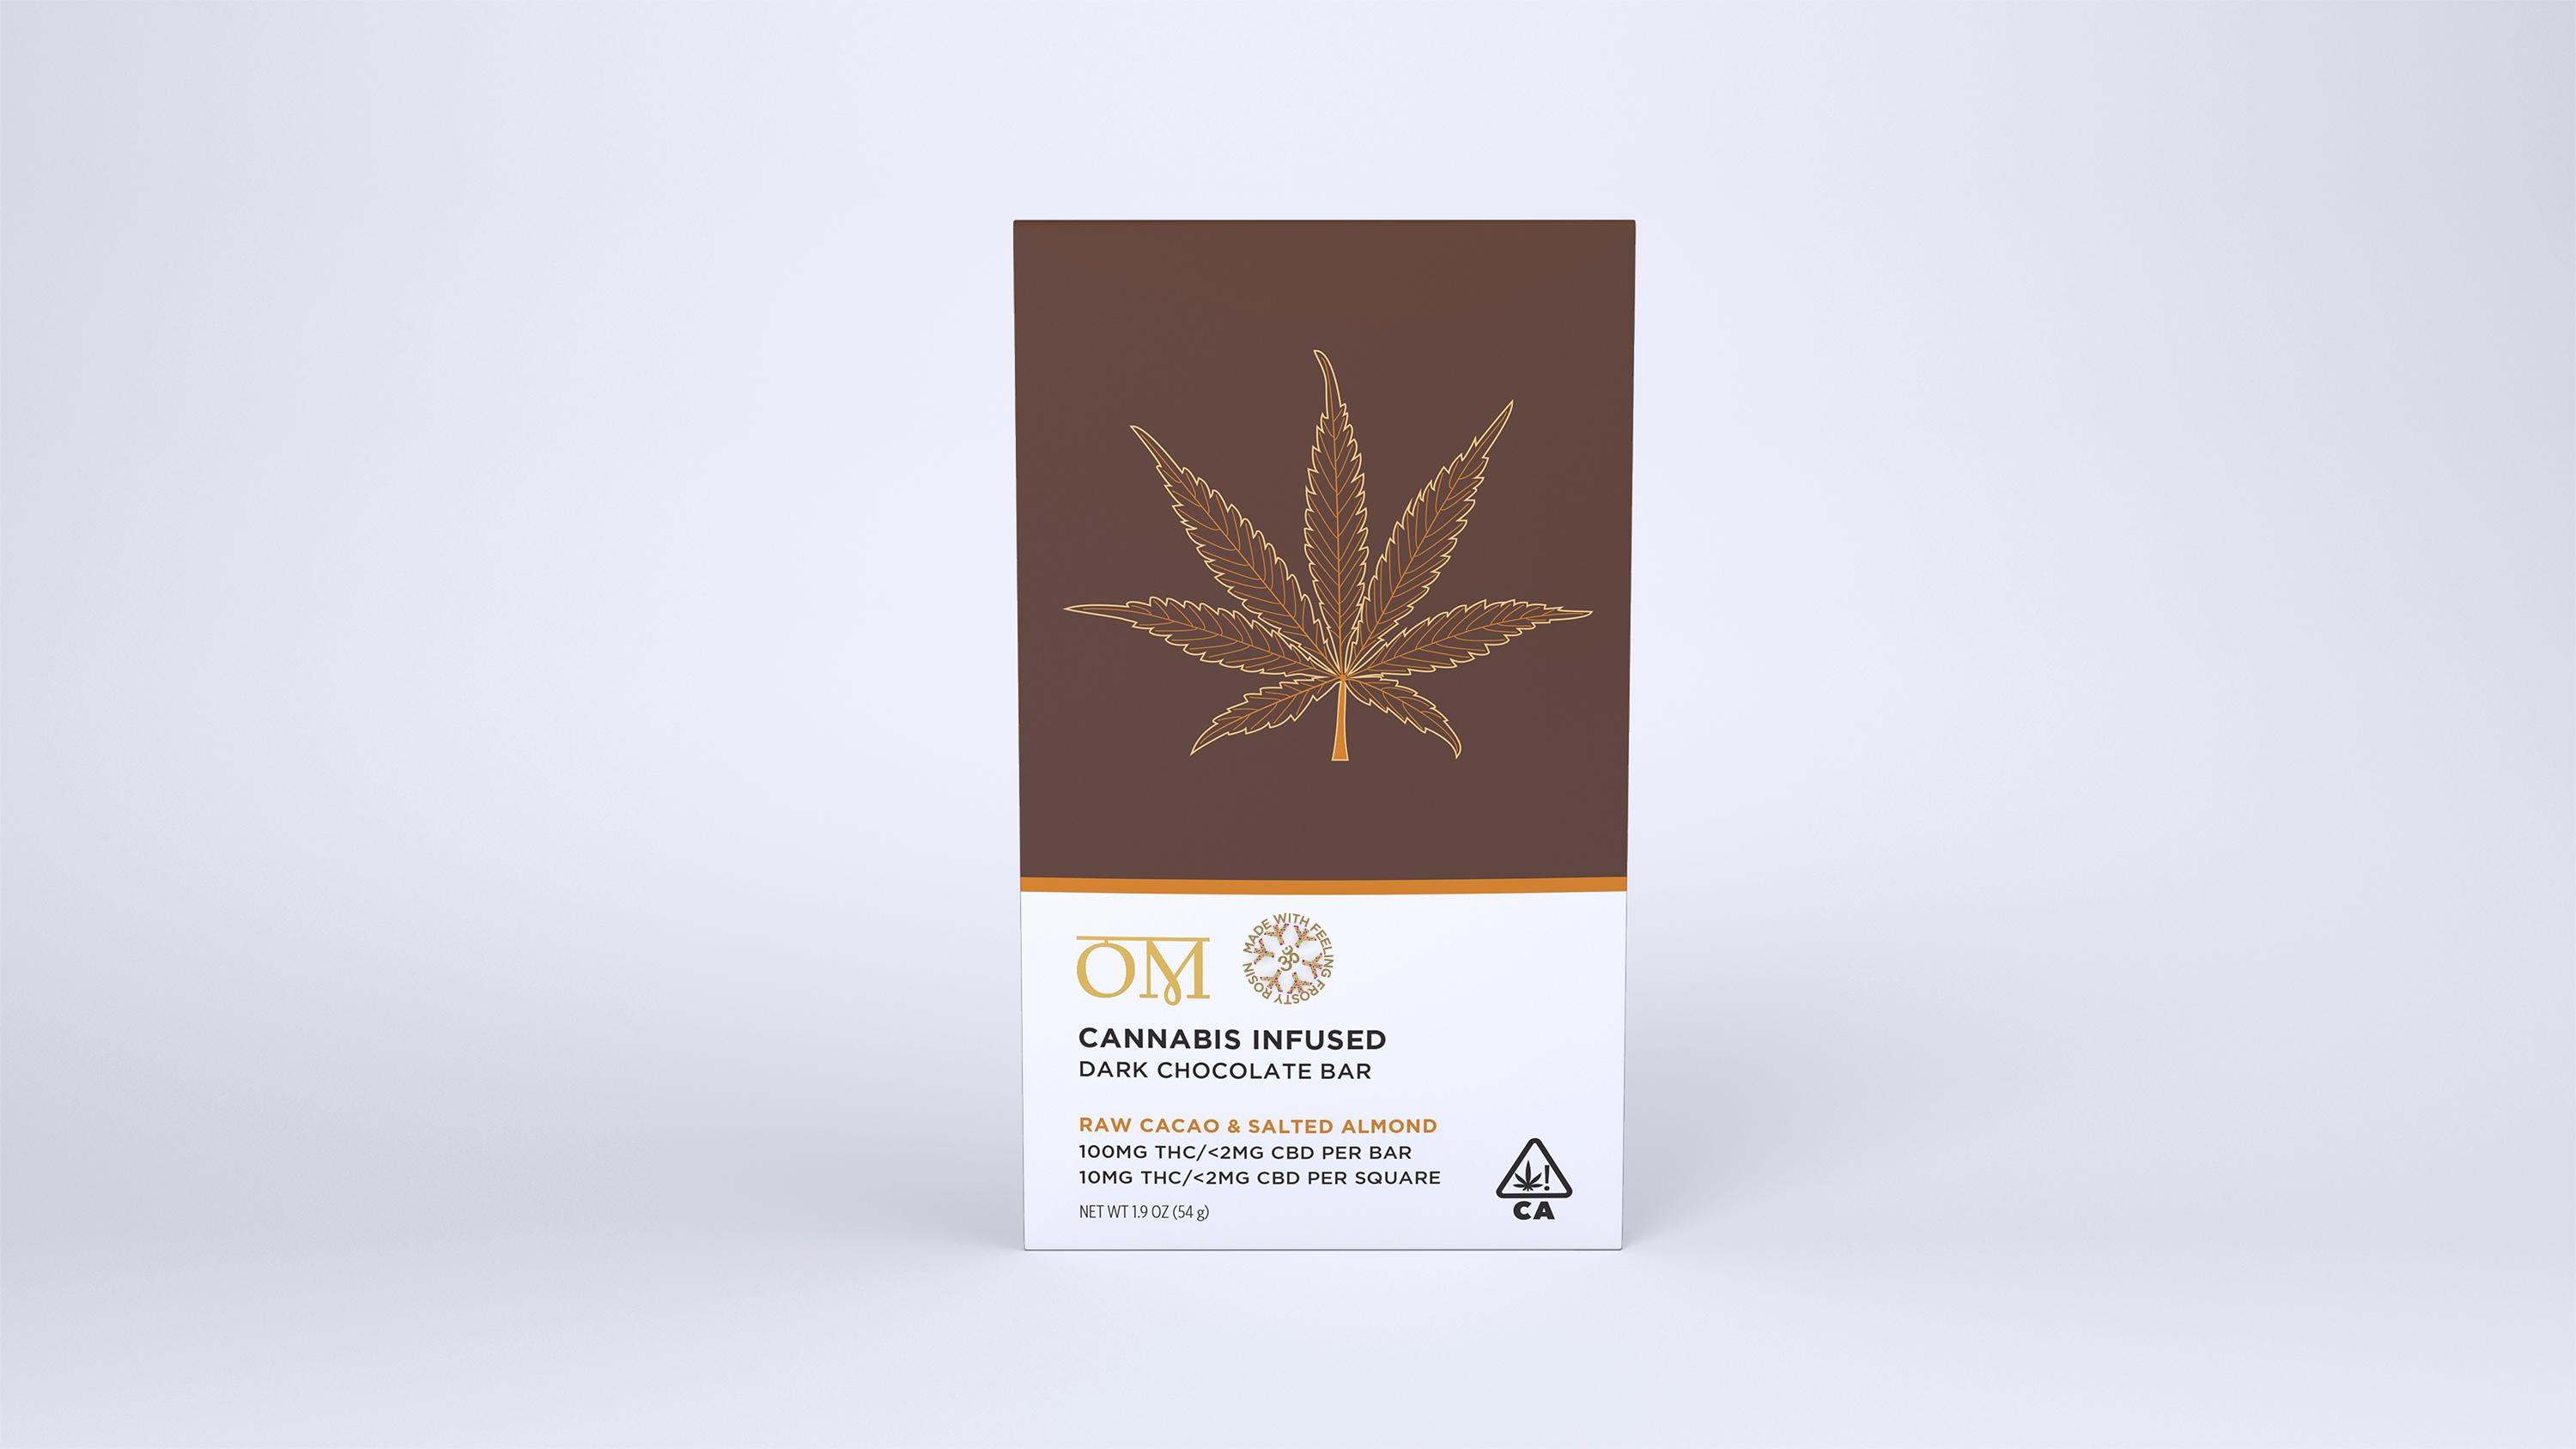 OM Dark Chocolate Raw Cacao with Salted Almonds Bar